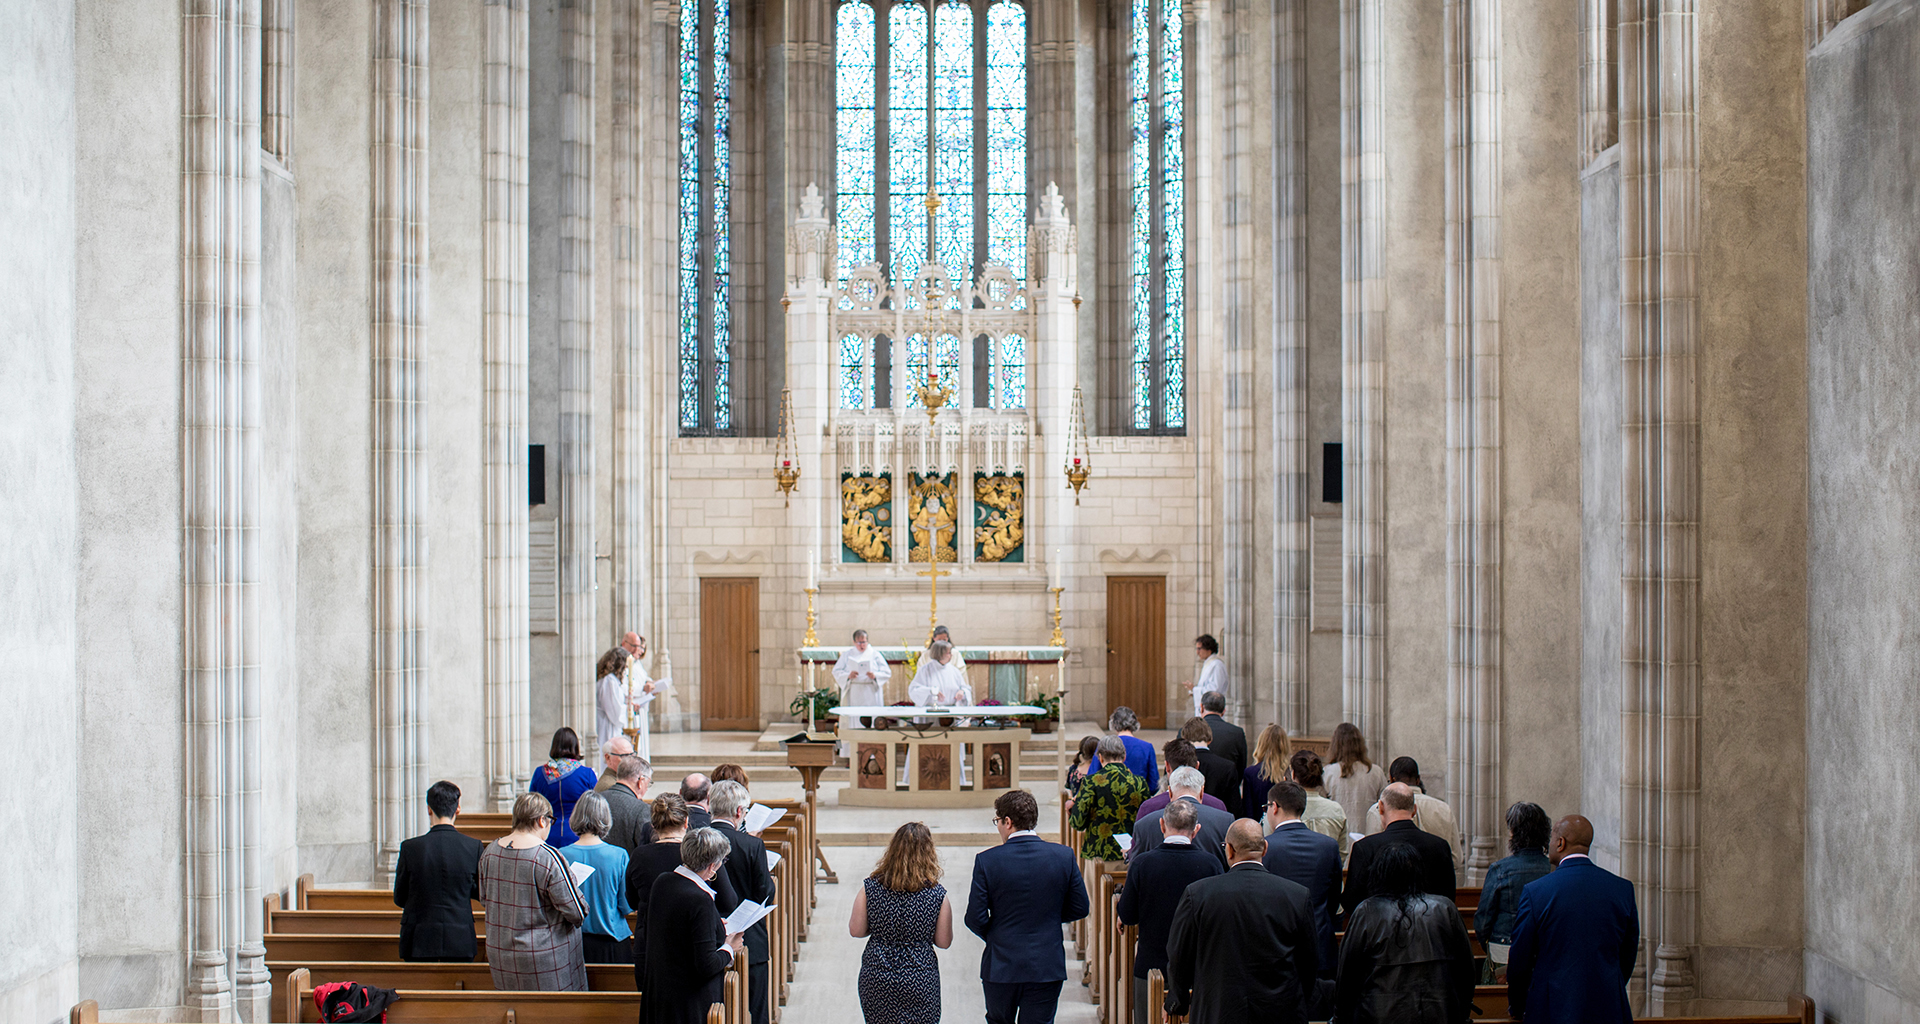 Chapel Service prior to Divinity Convocation 2019